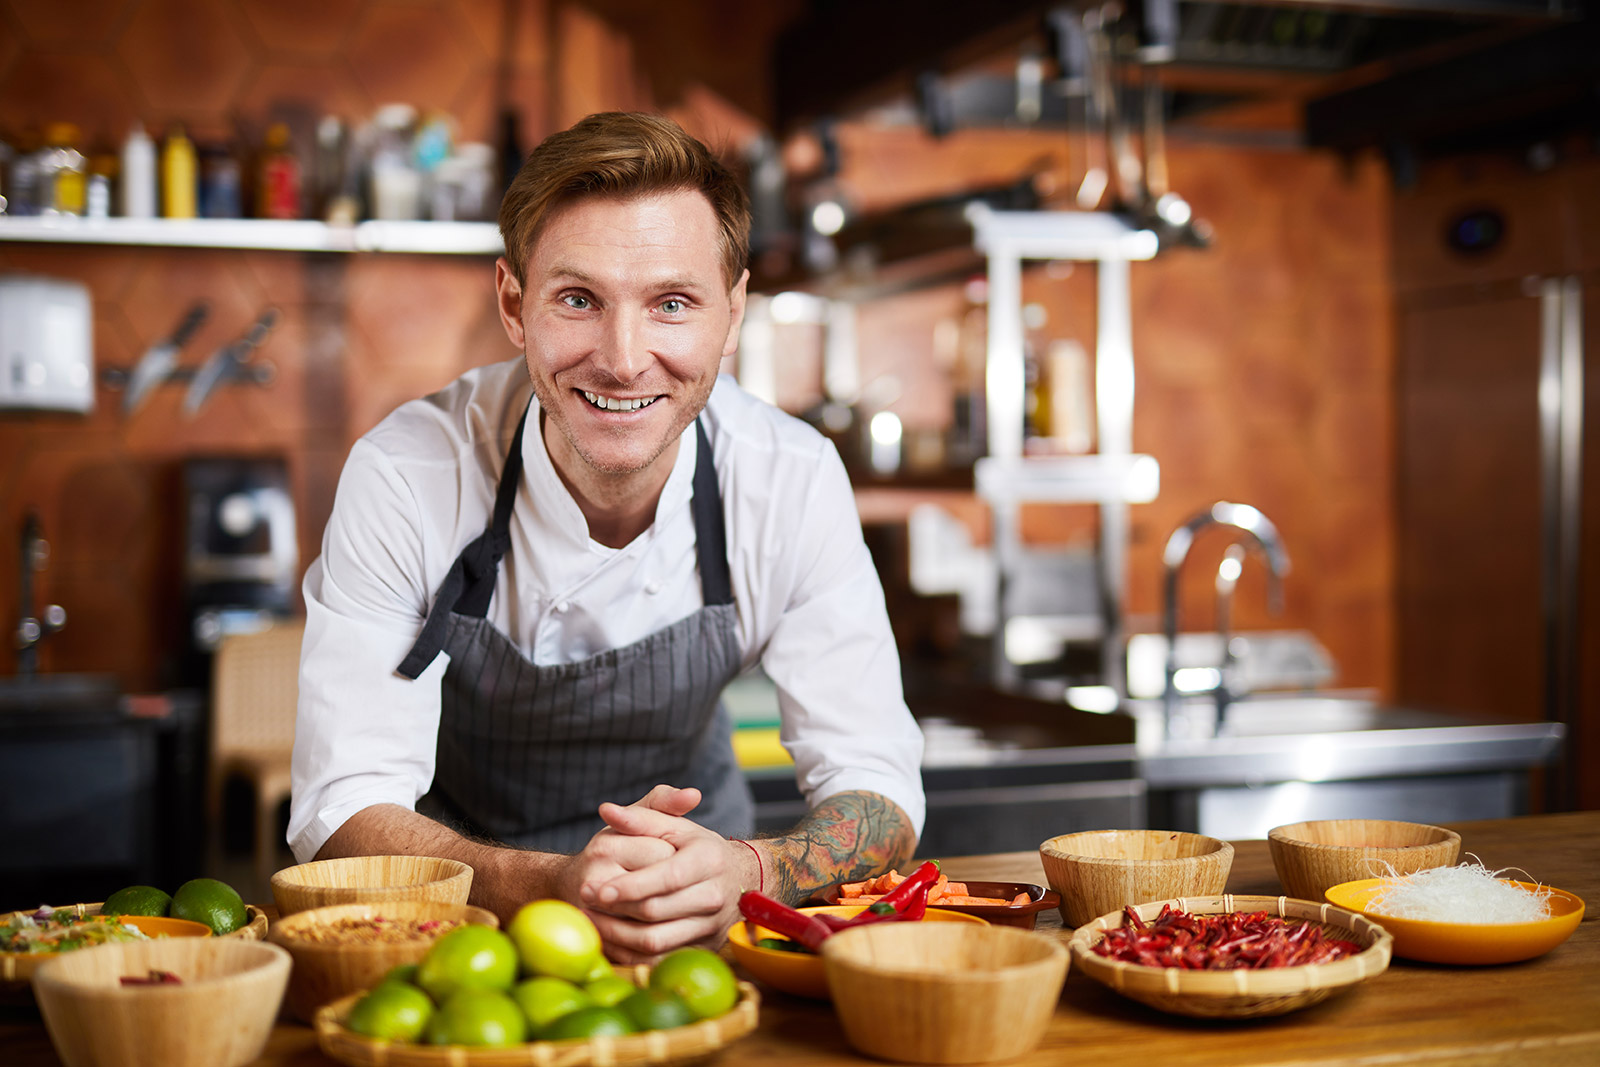 HR transition at a chef-driven restaurant group